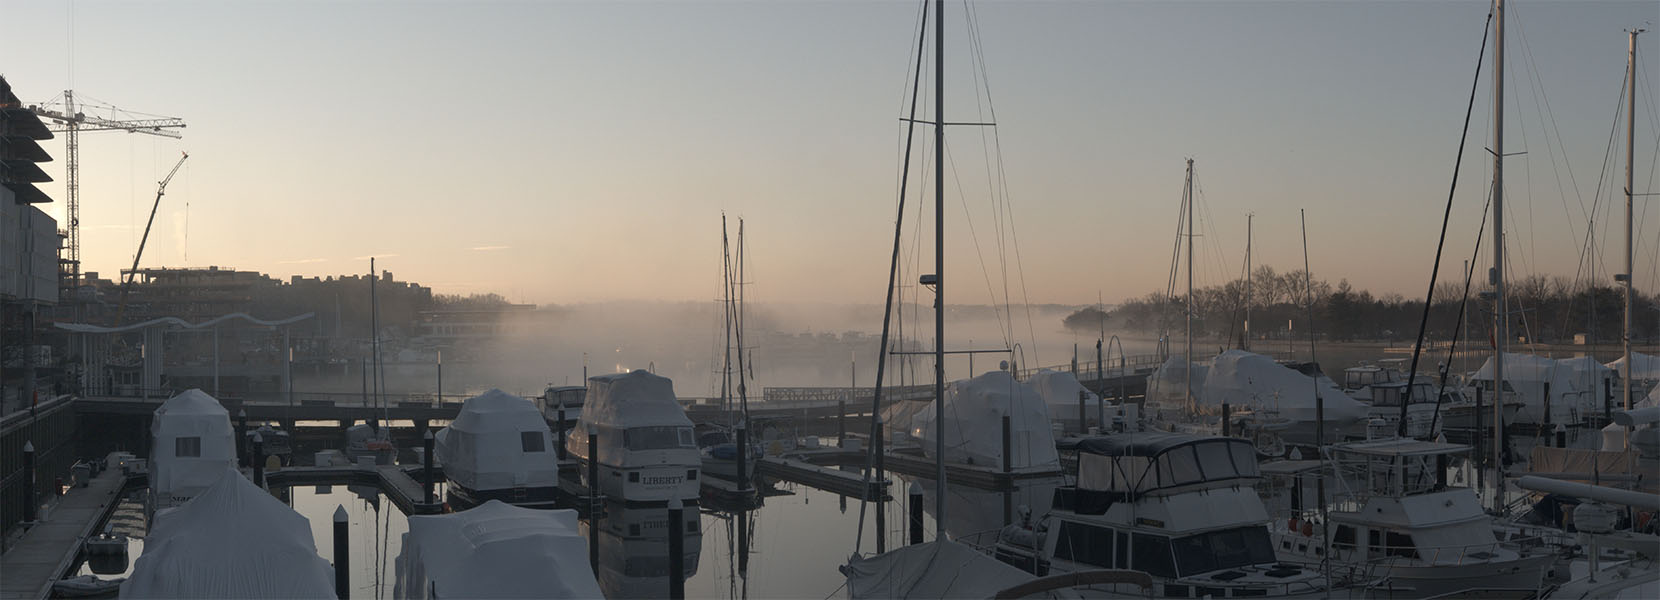 Dawn Over Marina, With Construction to Left, and Radiation Fog Over Water in Background.